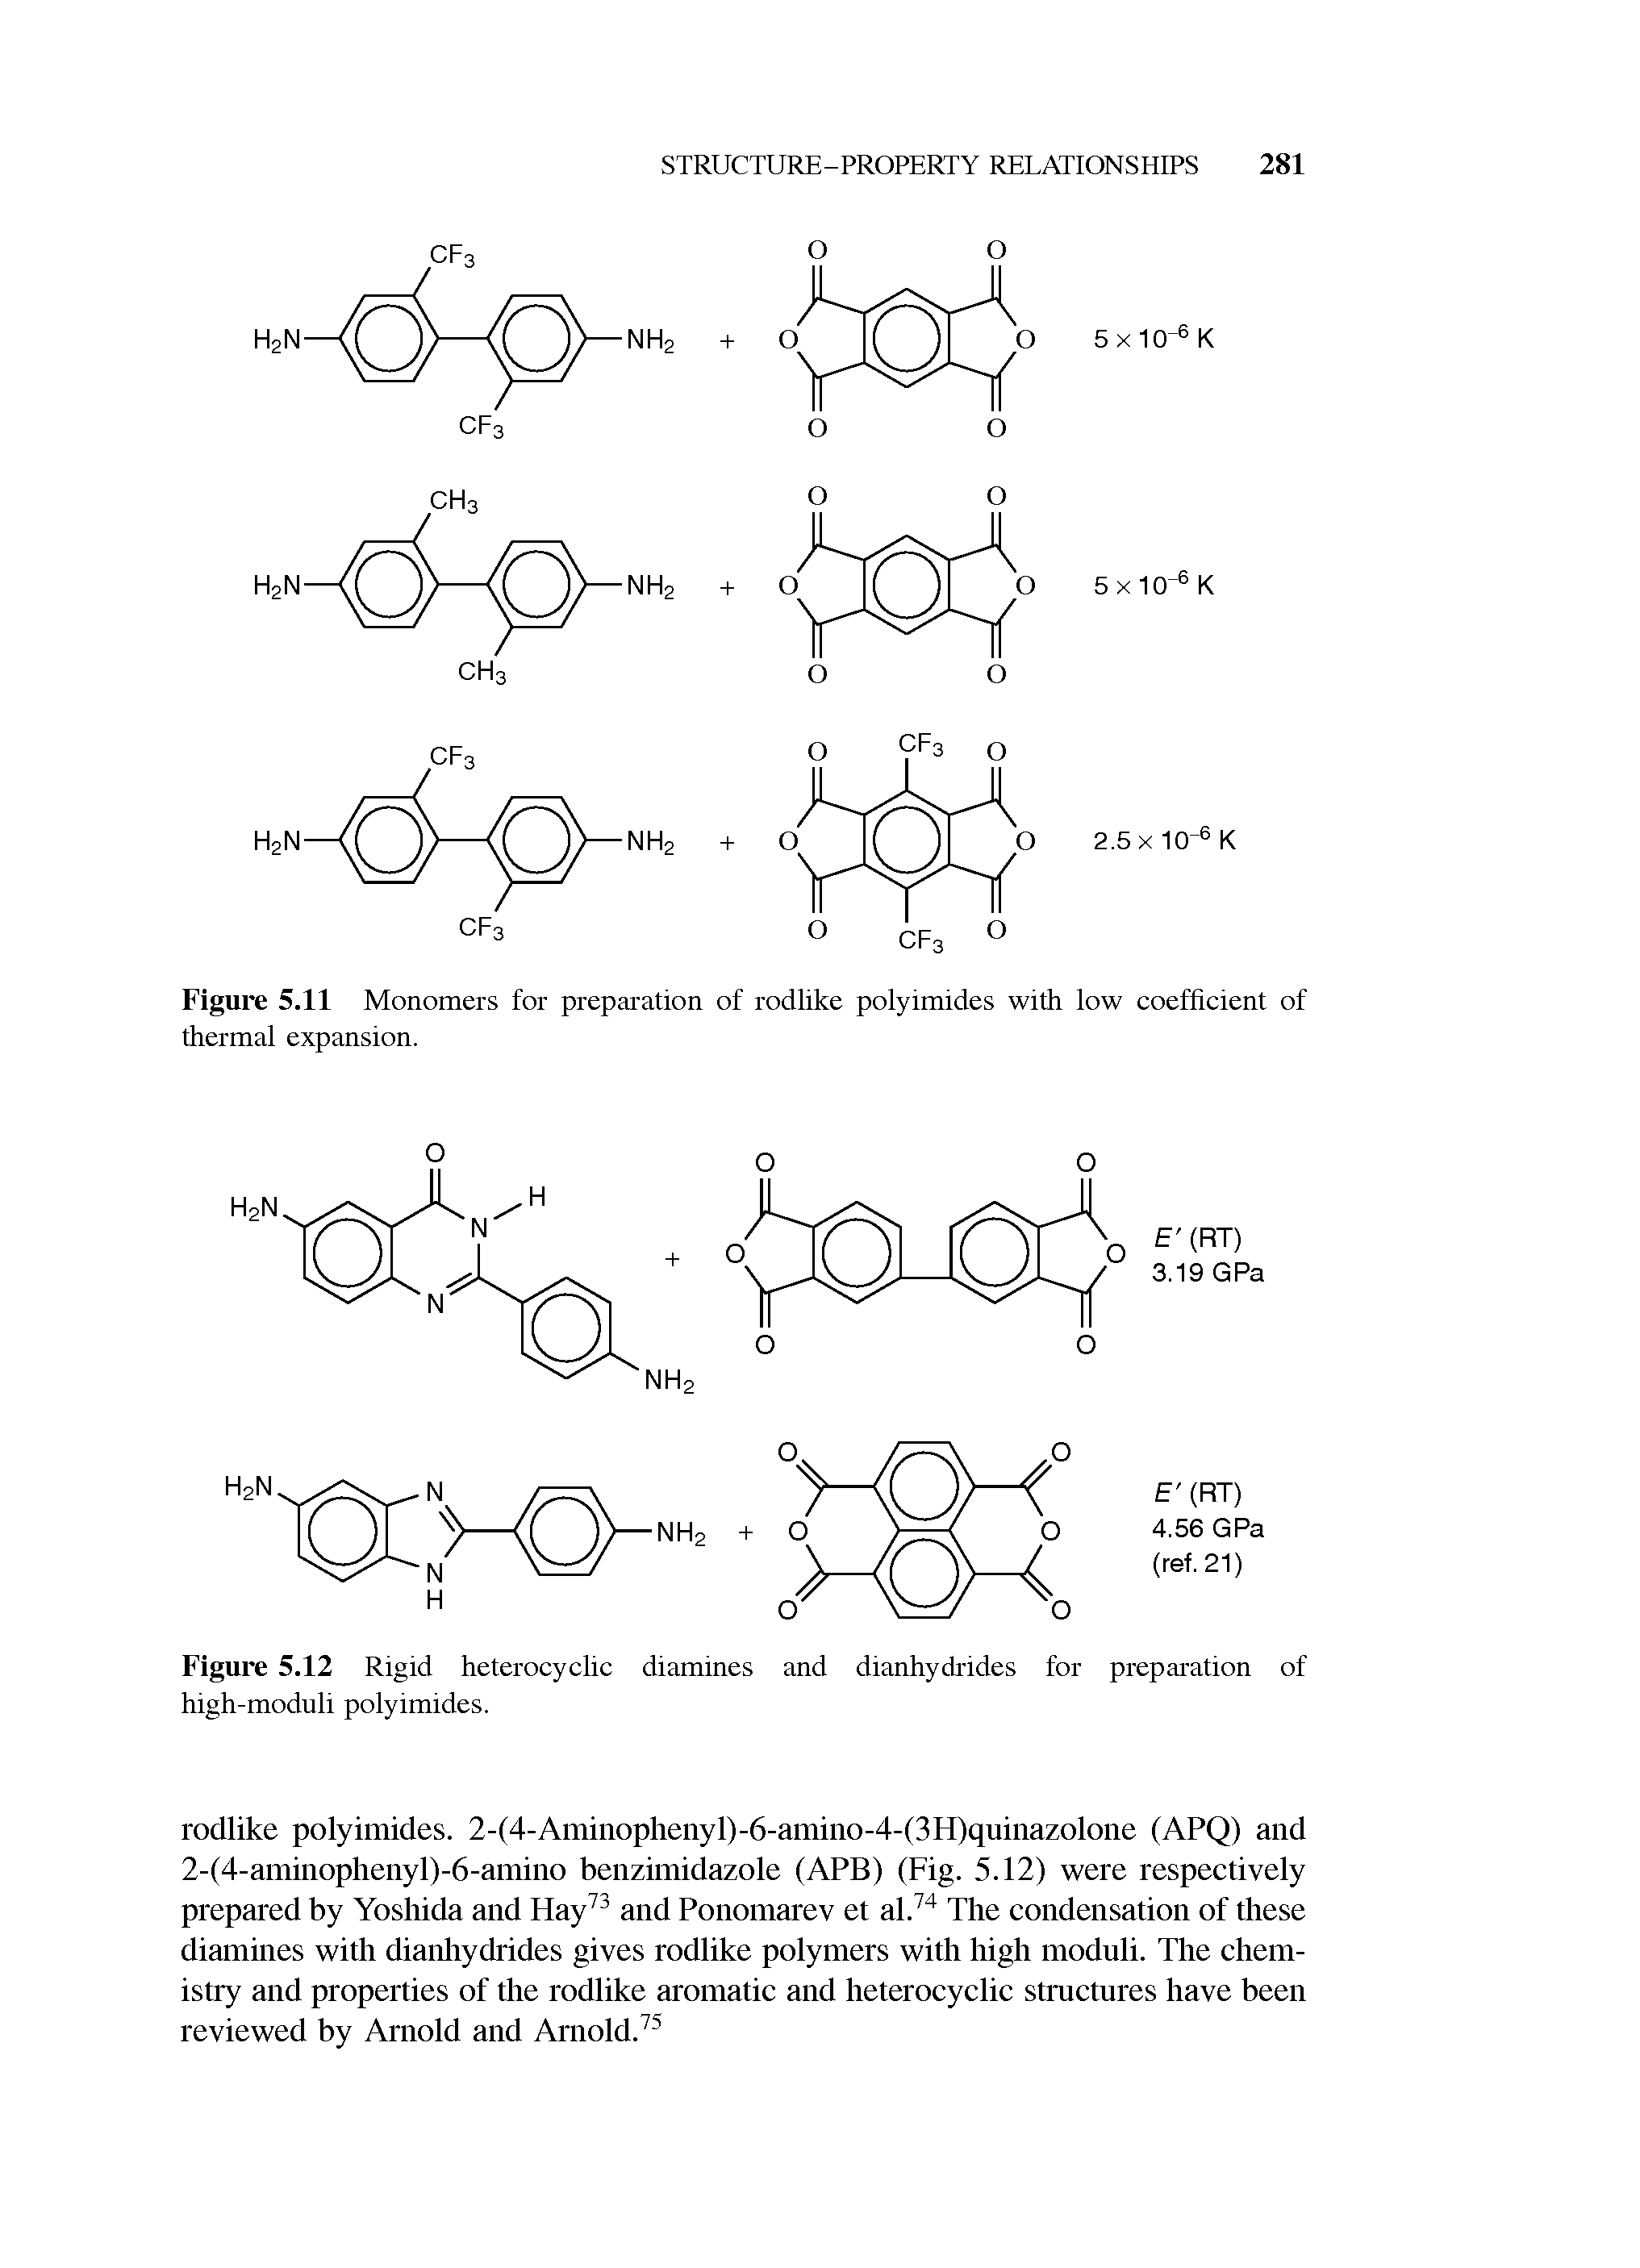 Figure 5.12 Rigid heterocyclic diamines and dianhydrides for preparation of high-moduli polyimides.